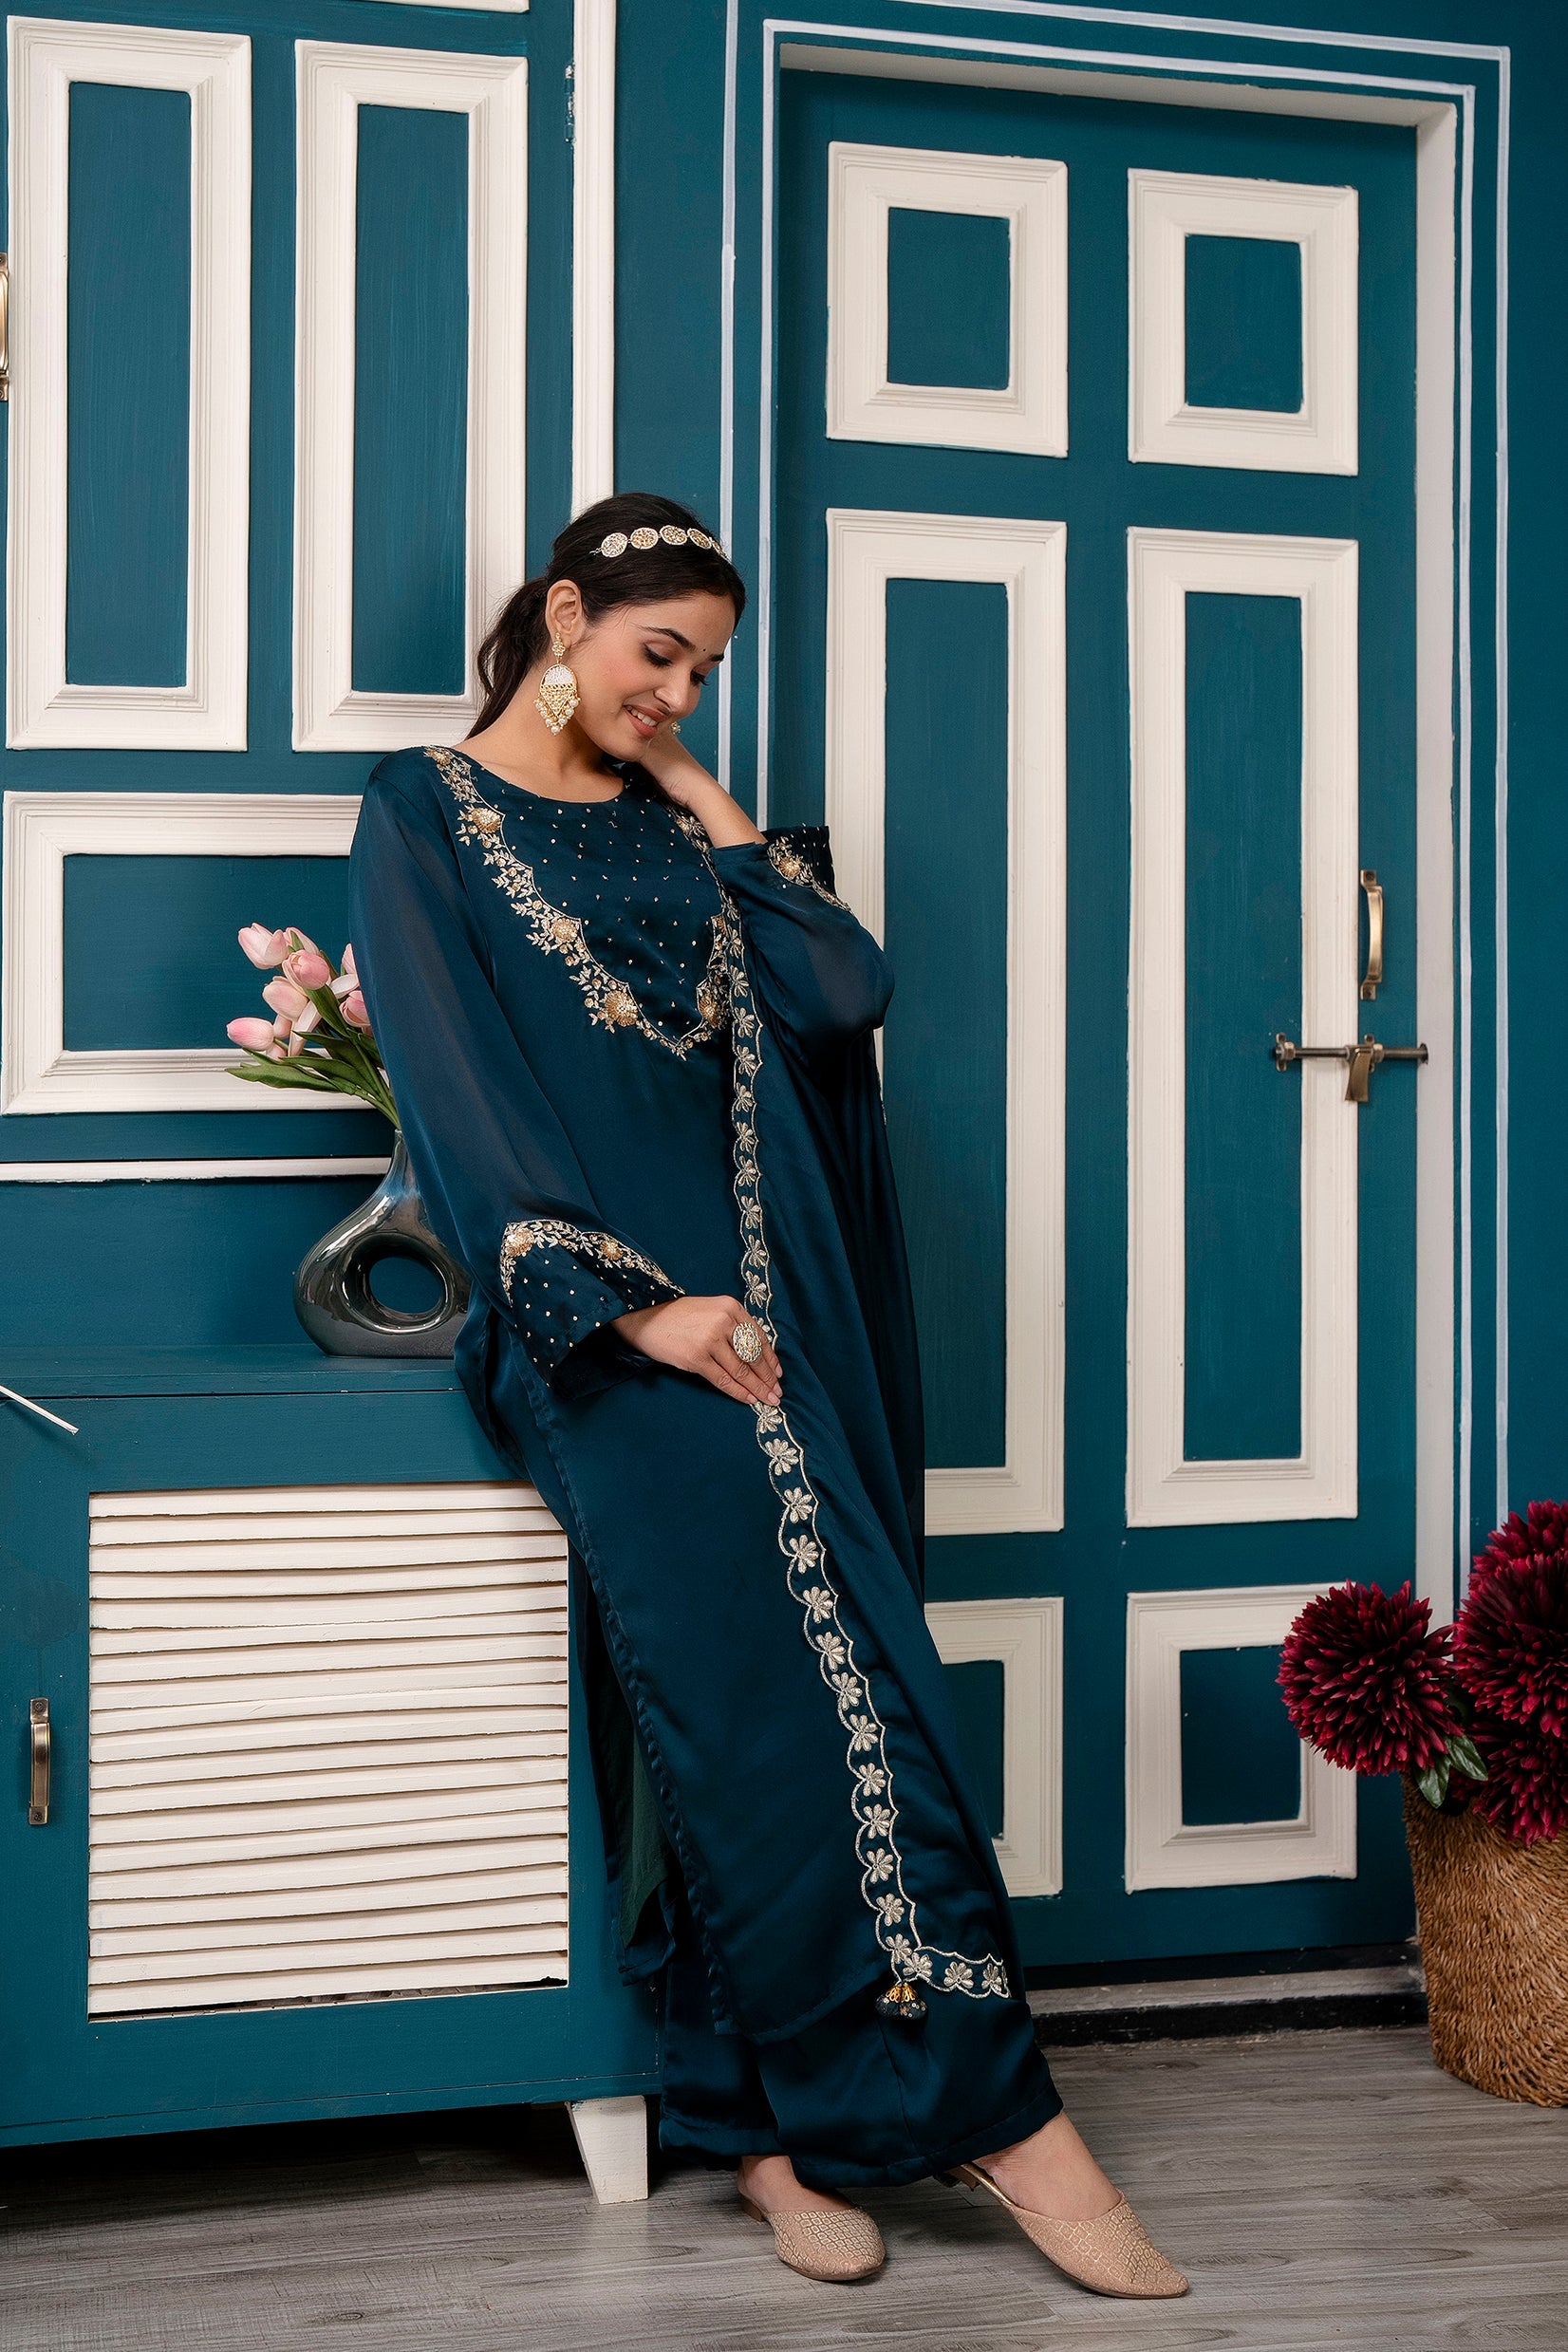 Silk Satin Kurta Set with Intricate Hand Detailings, Palazzo Pant, Attached Lining, and Dupatta